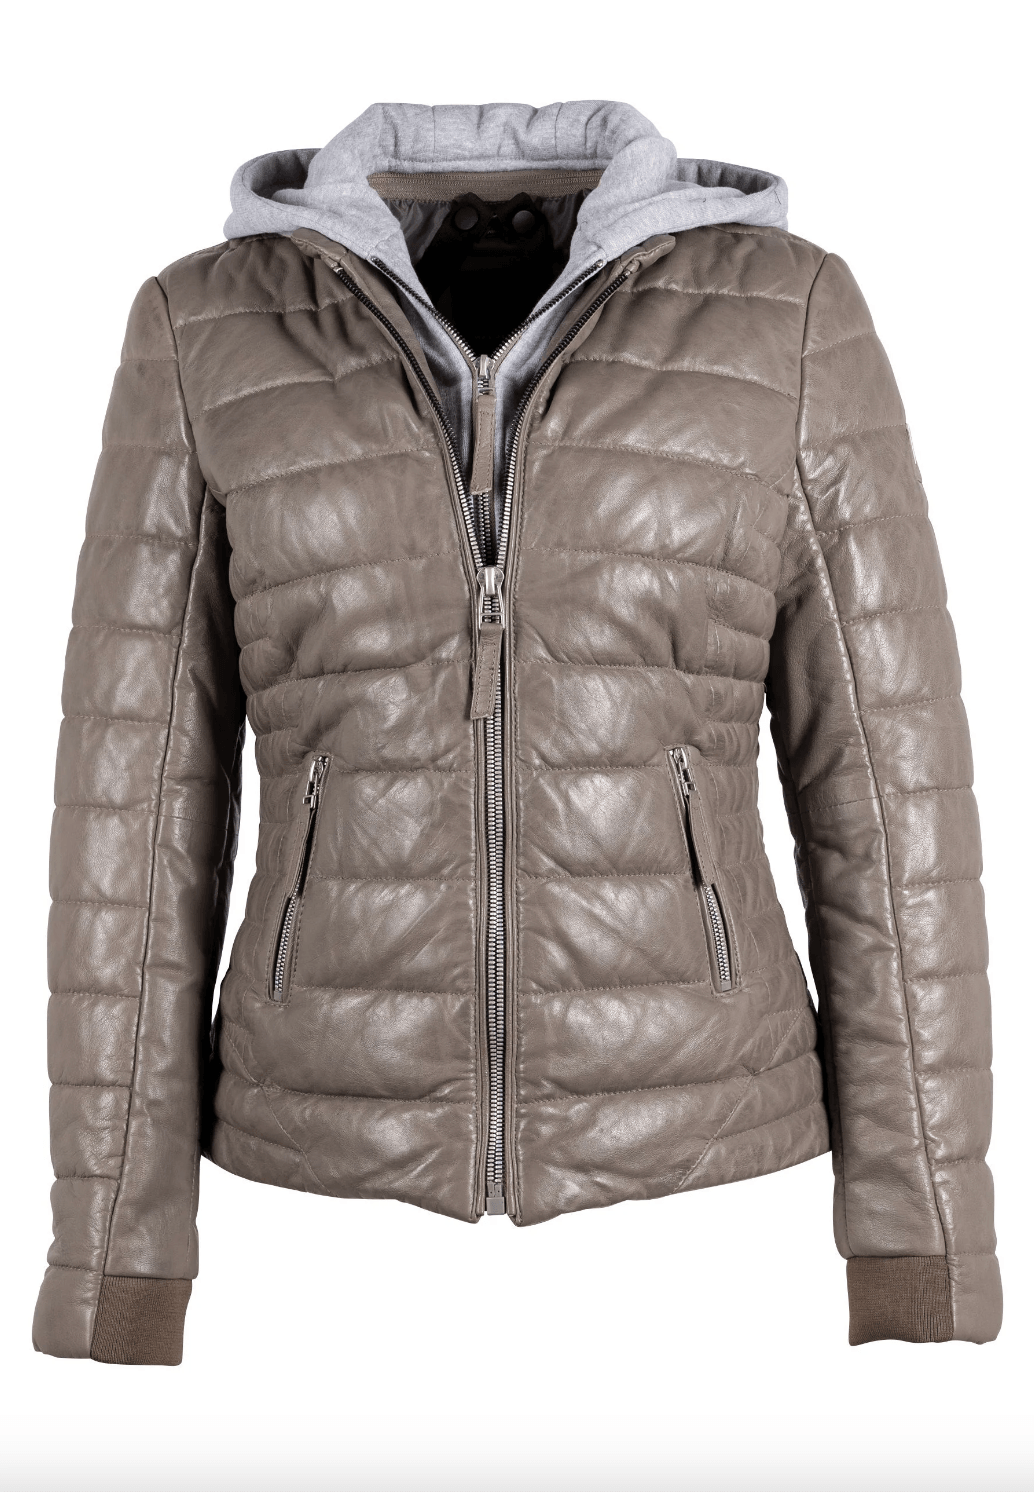 Robin Leather Jacket in Grey by Mauritius - Haven